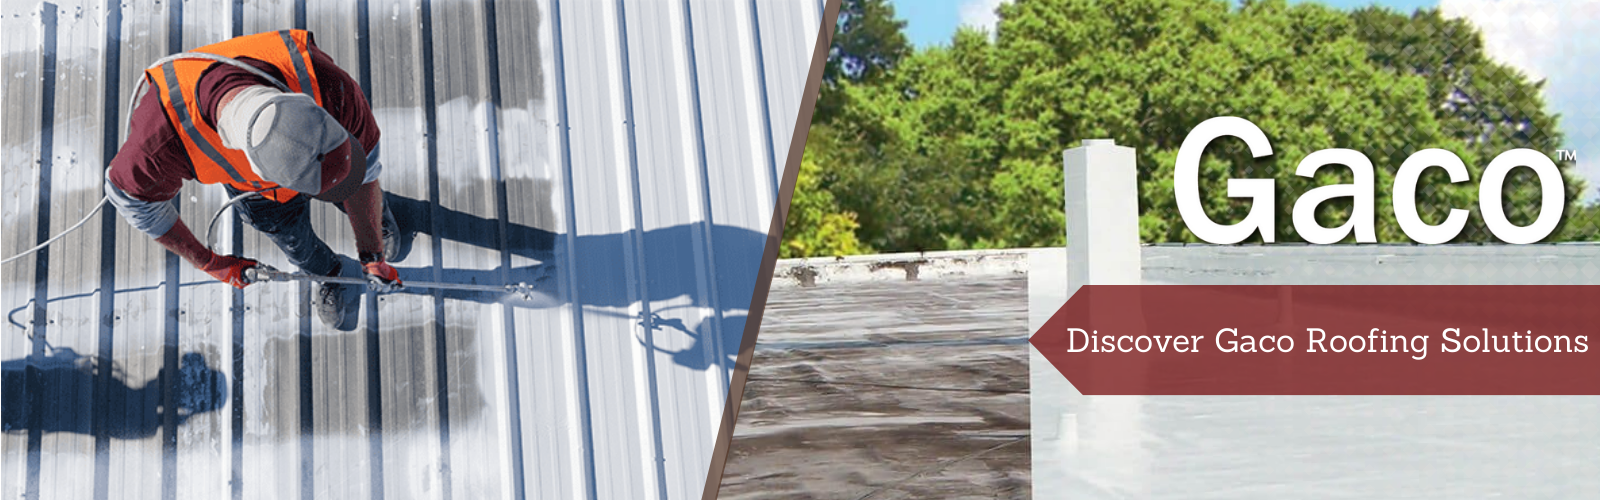 Discover Gaco Roofing Solutions